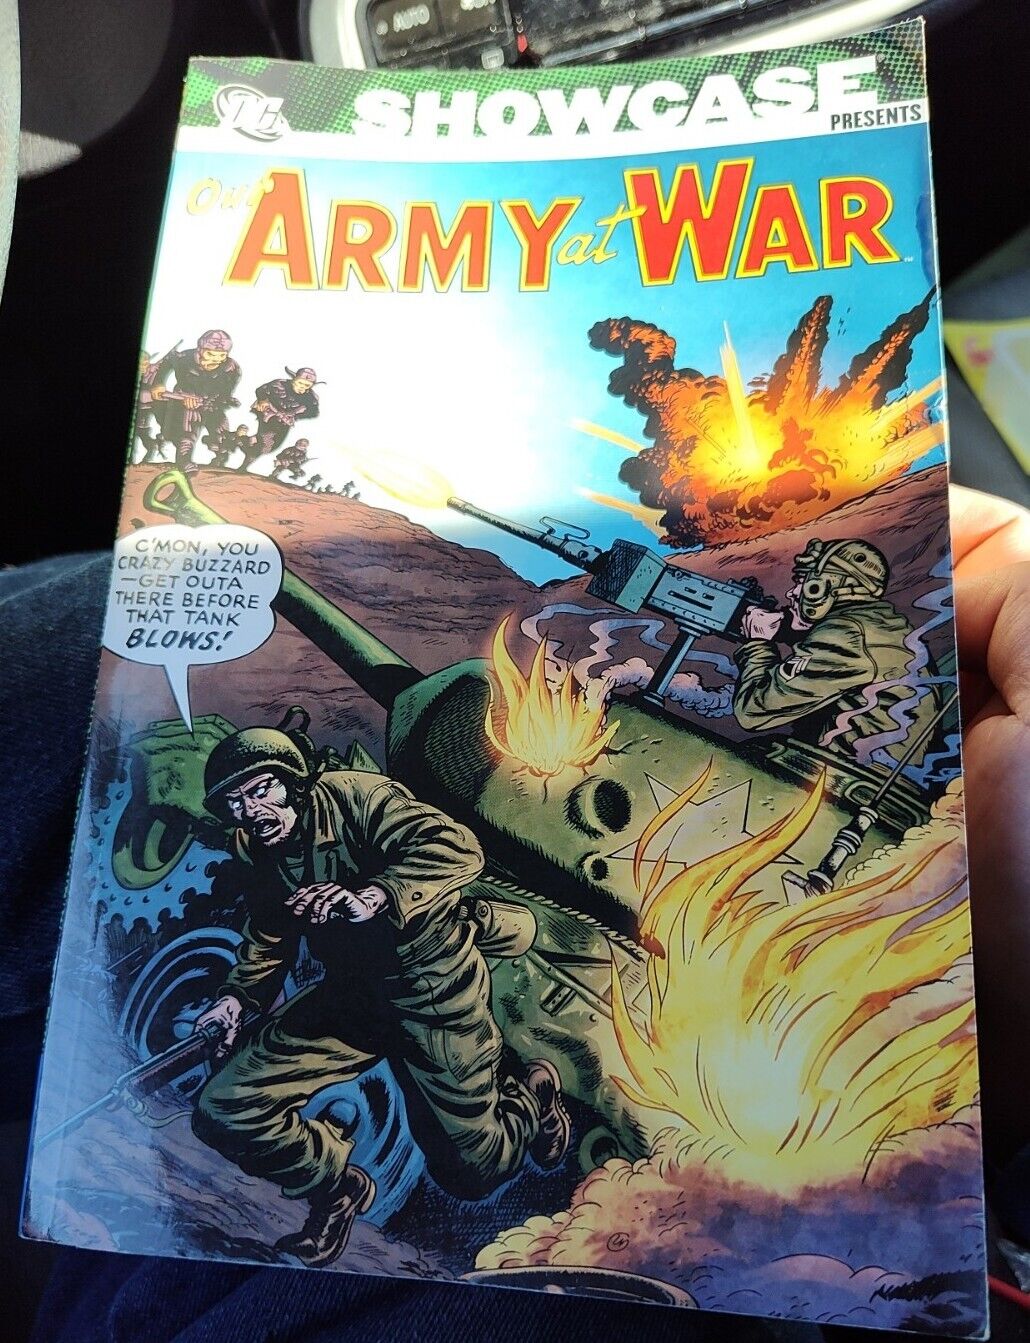 Our Army at War by Dave Wood, Robert Kanigher and Fred Ray, 2010